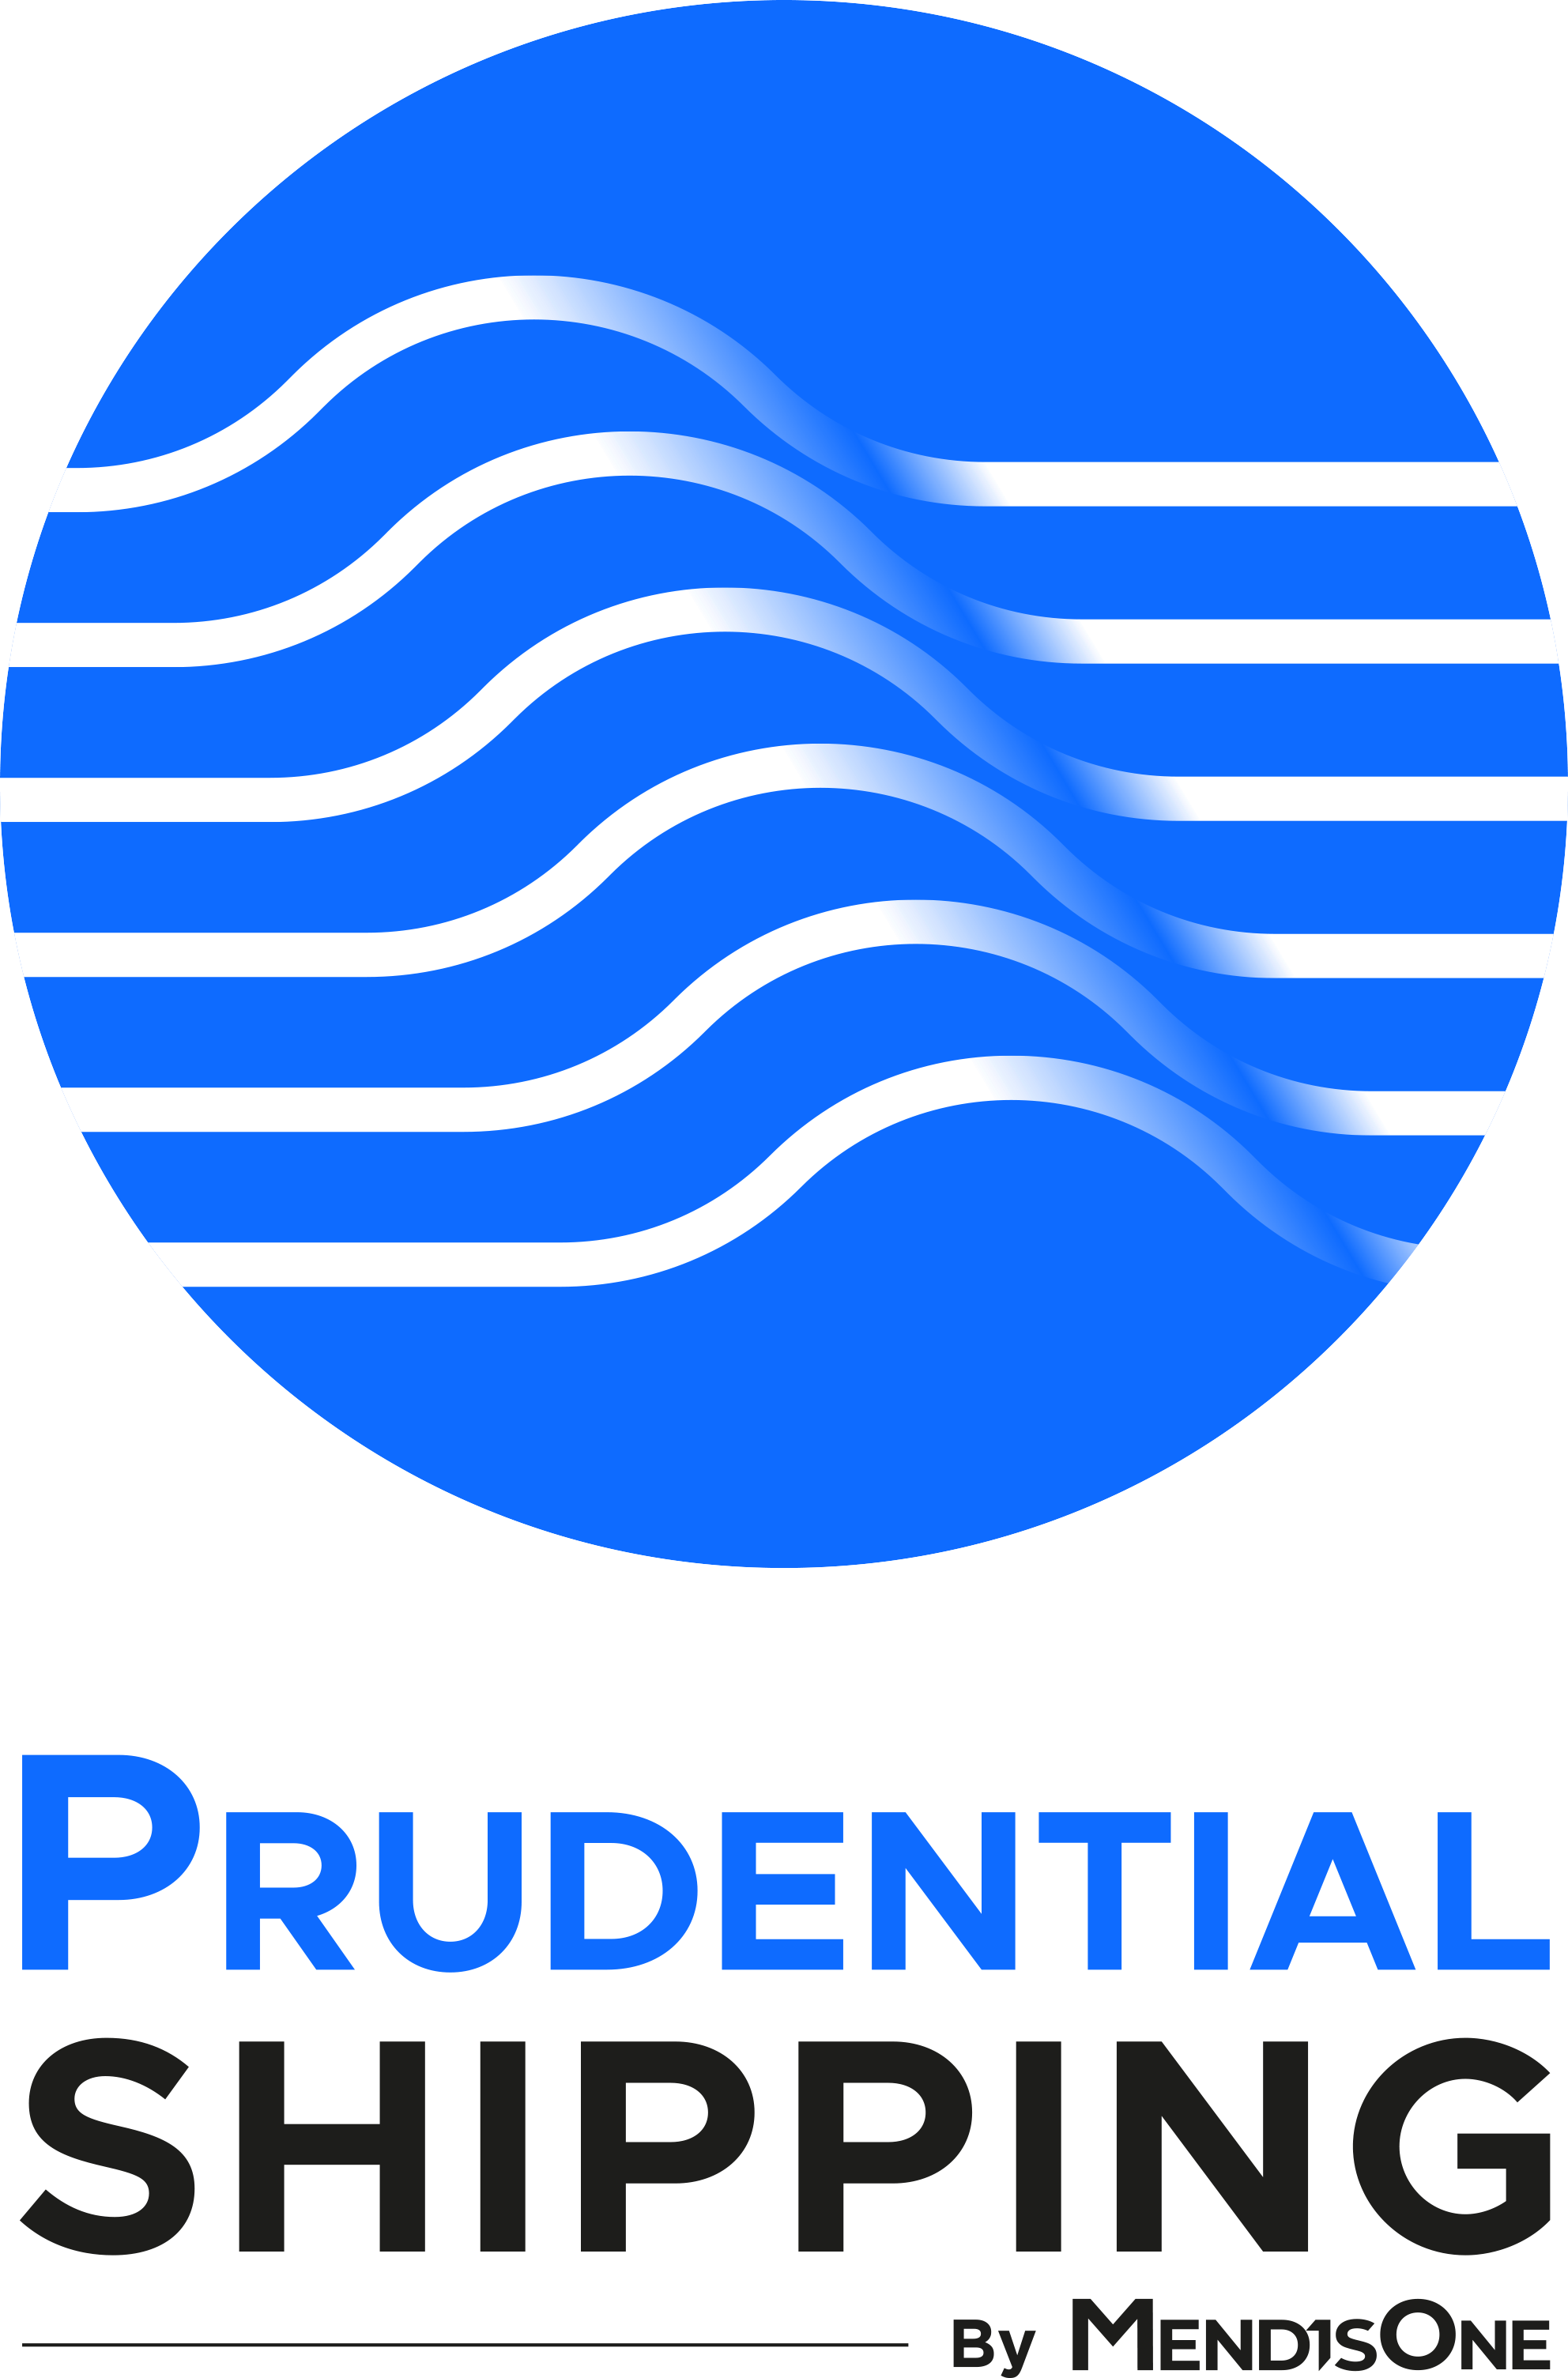 Prudential Shipping(PVT) LTD